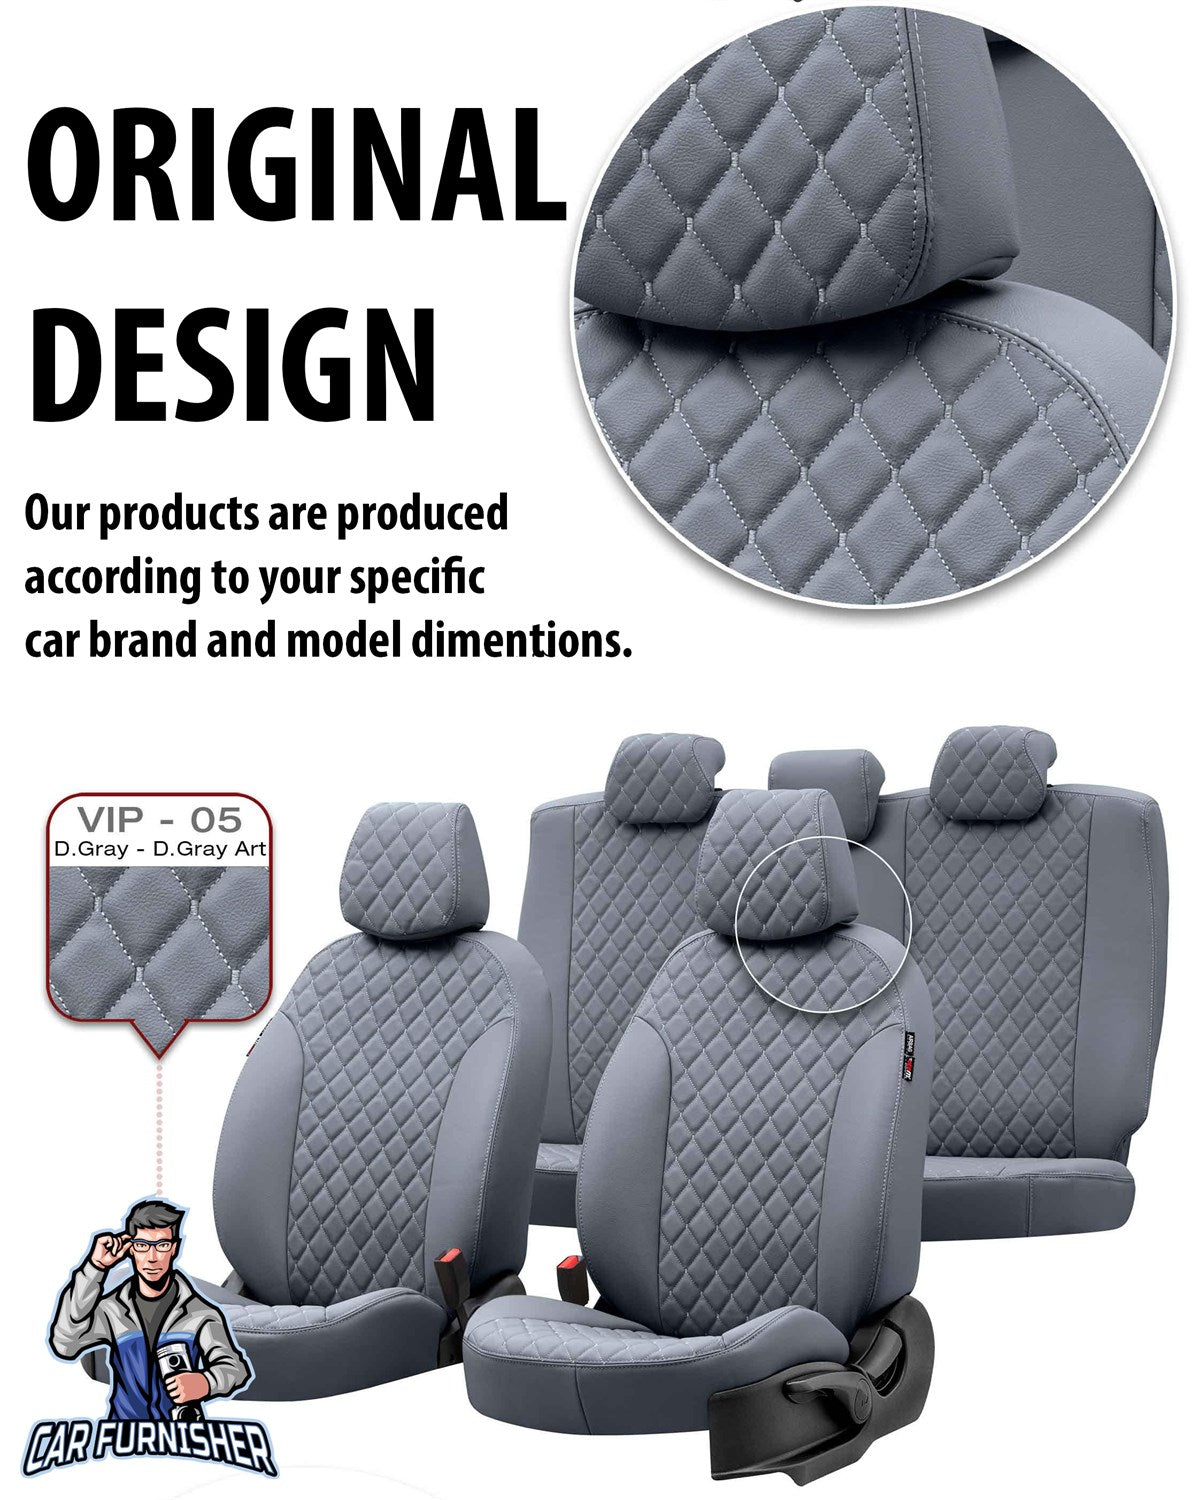 Iveco Daily Seat Covers Madrid Leather Design Beige Leather